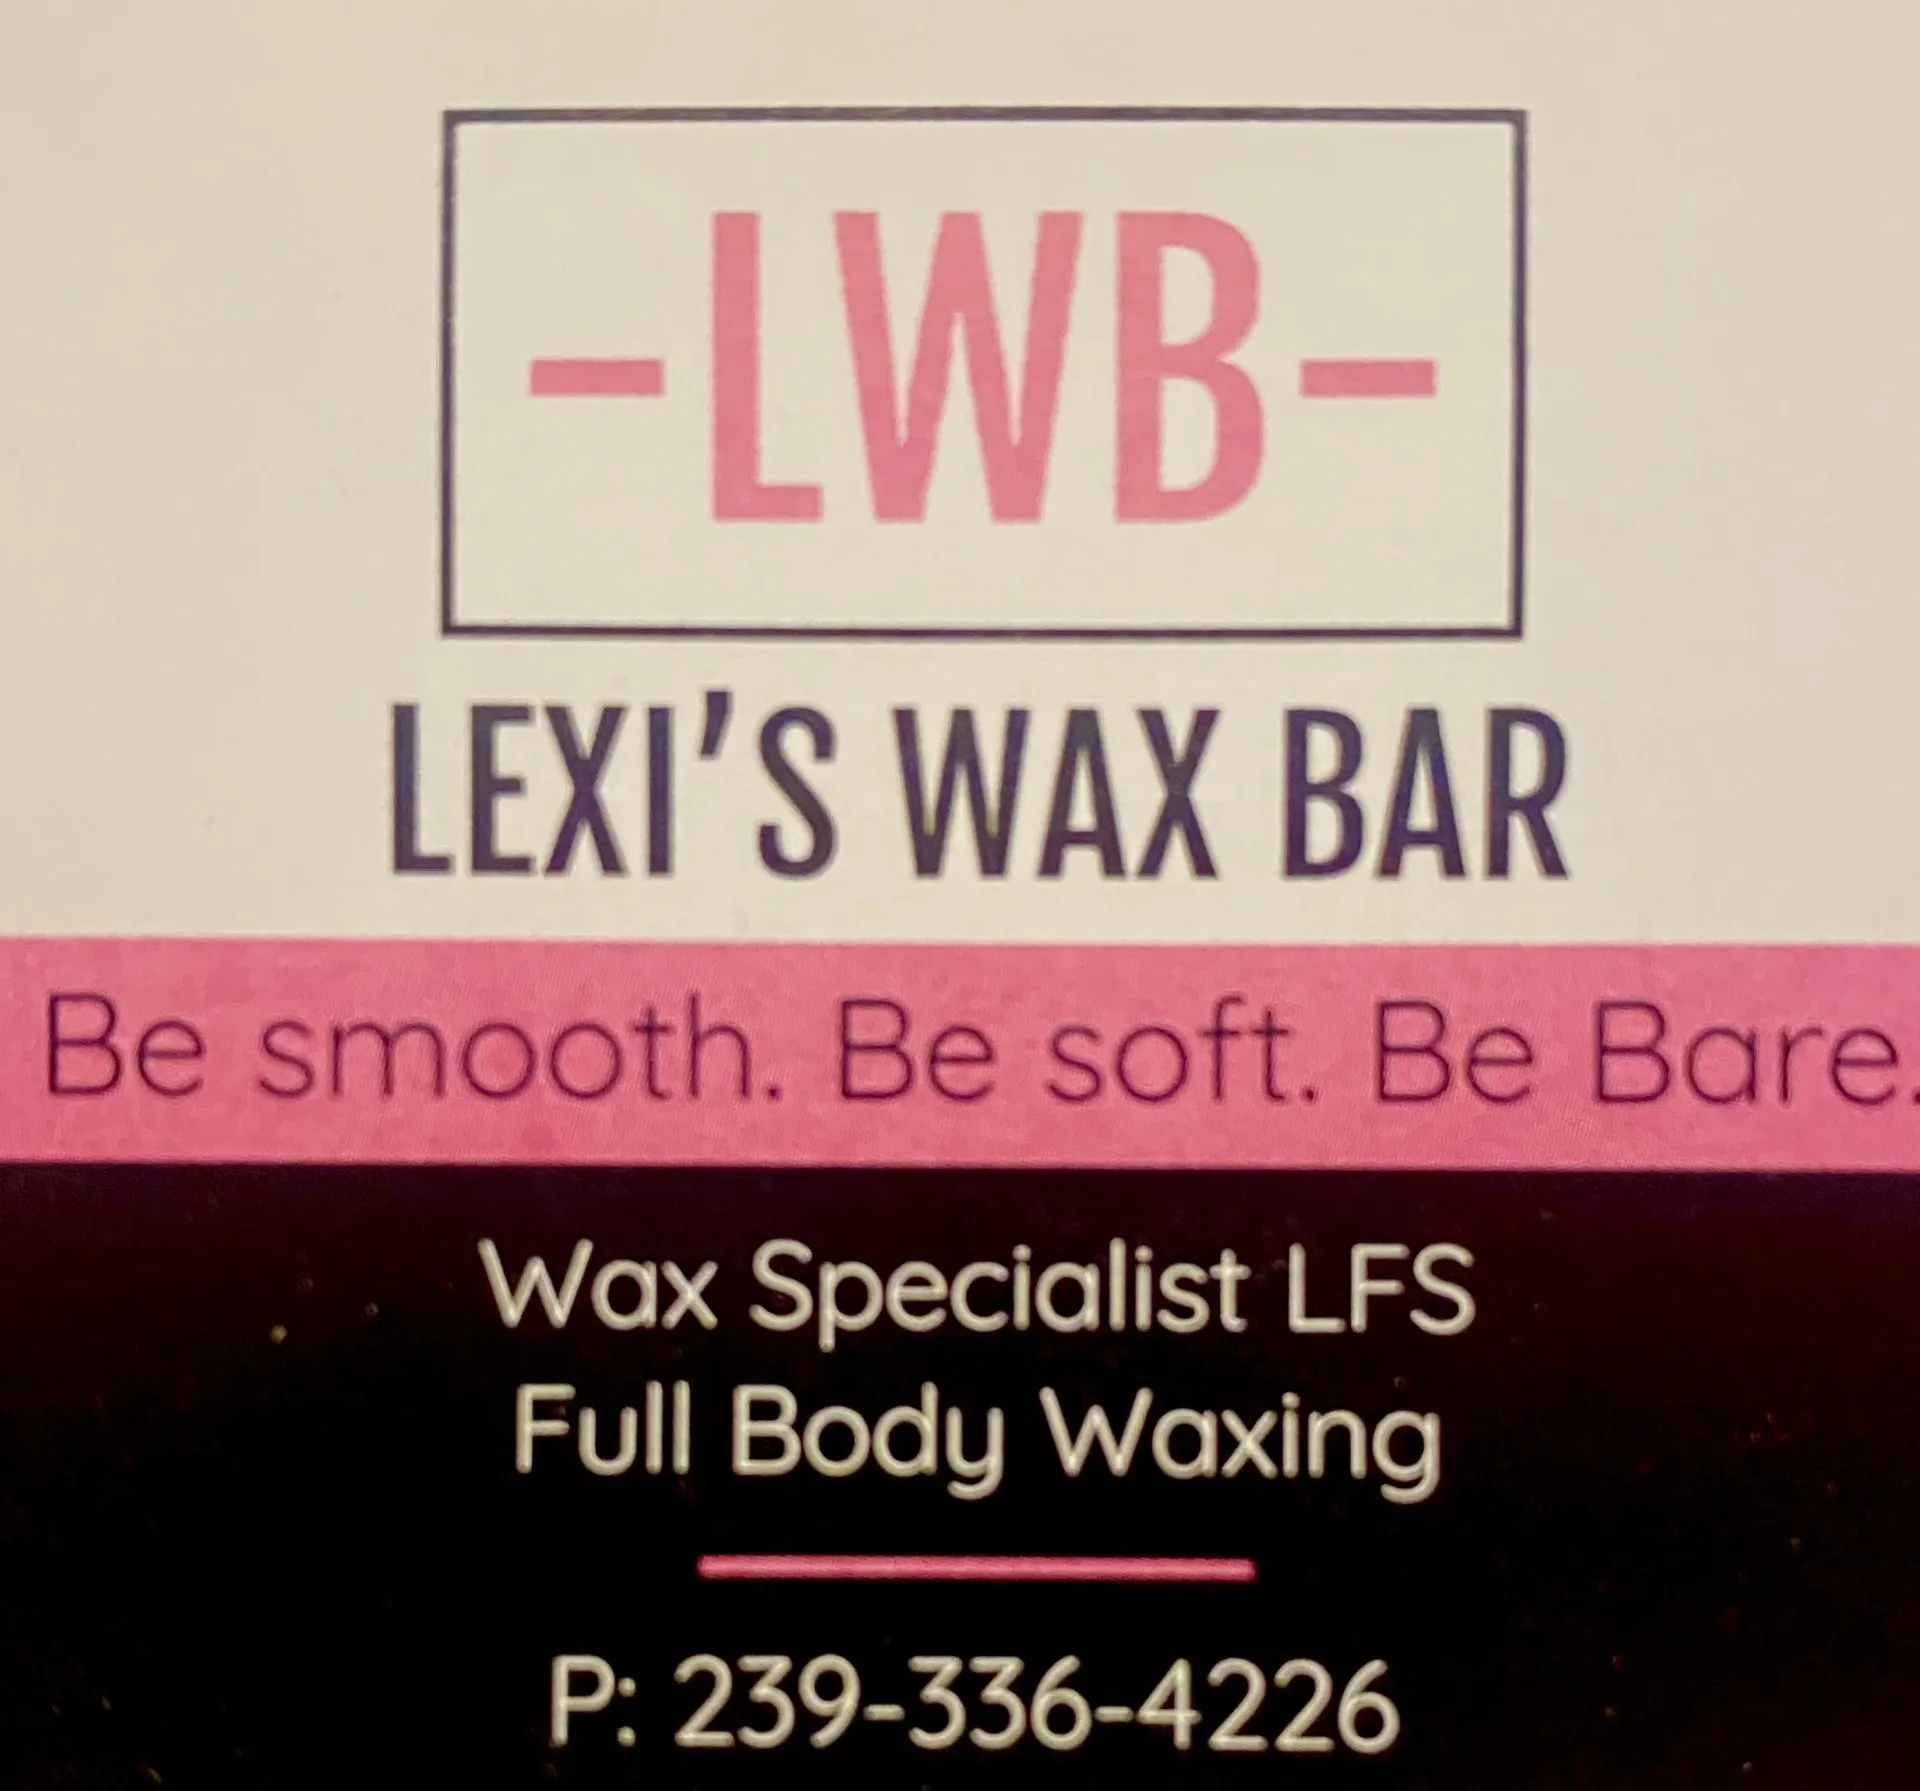 A logo for lexi 's wax bar with a phone number